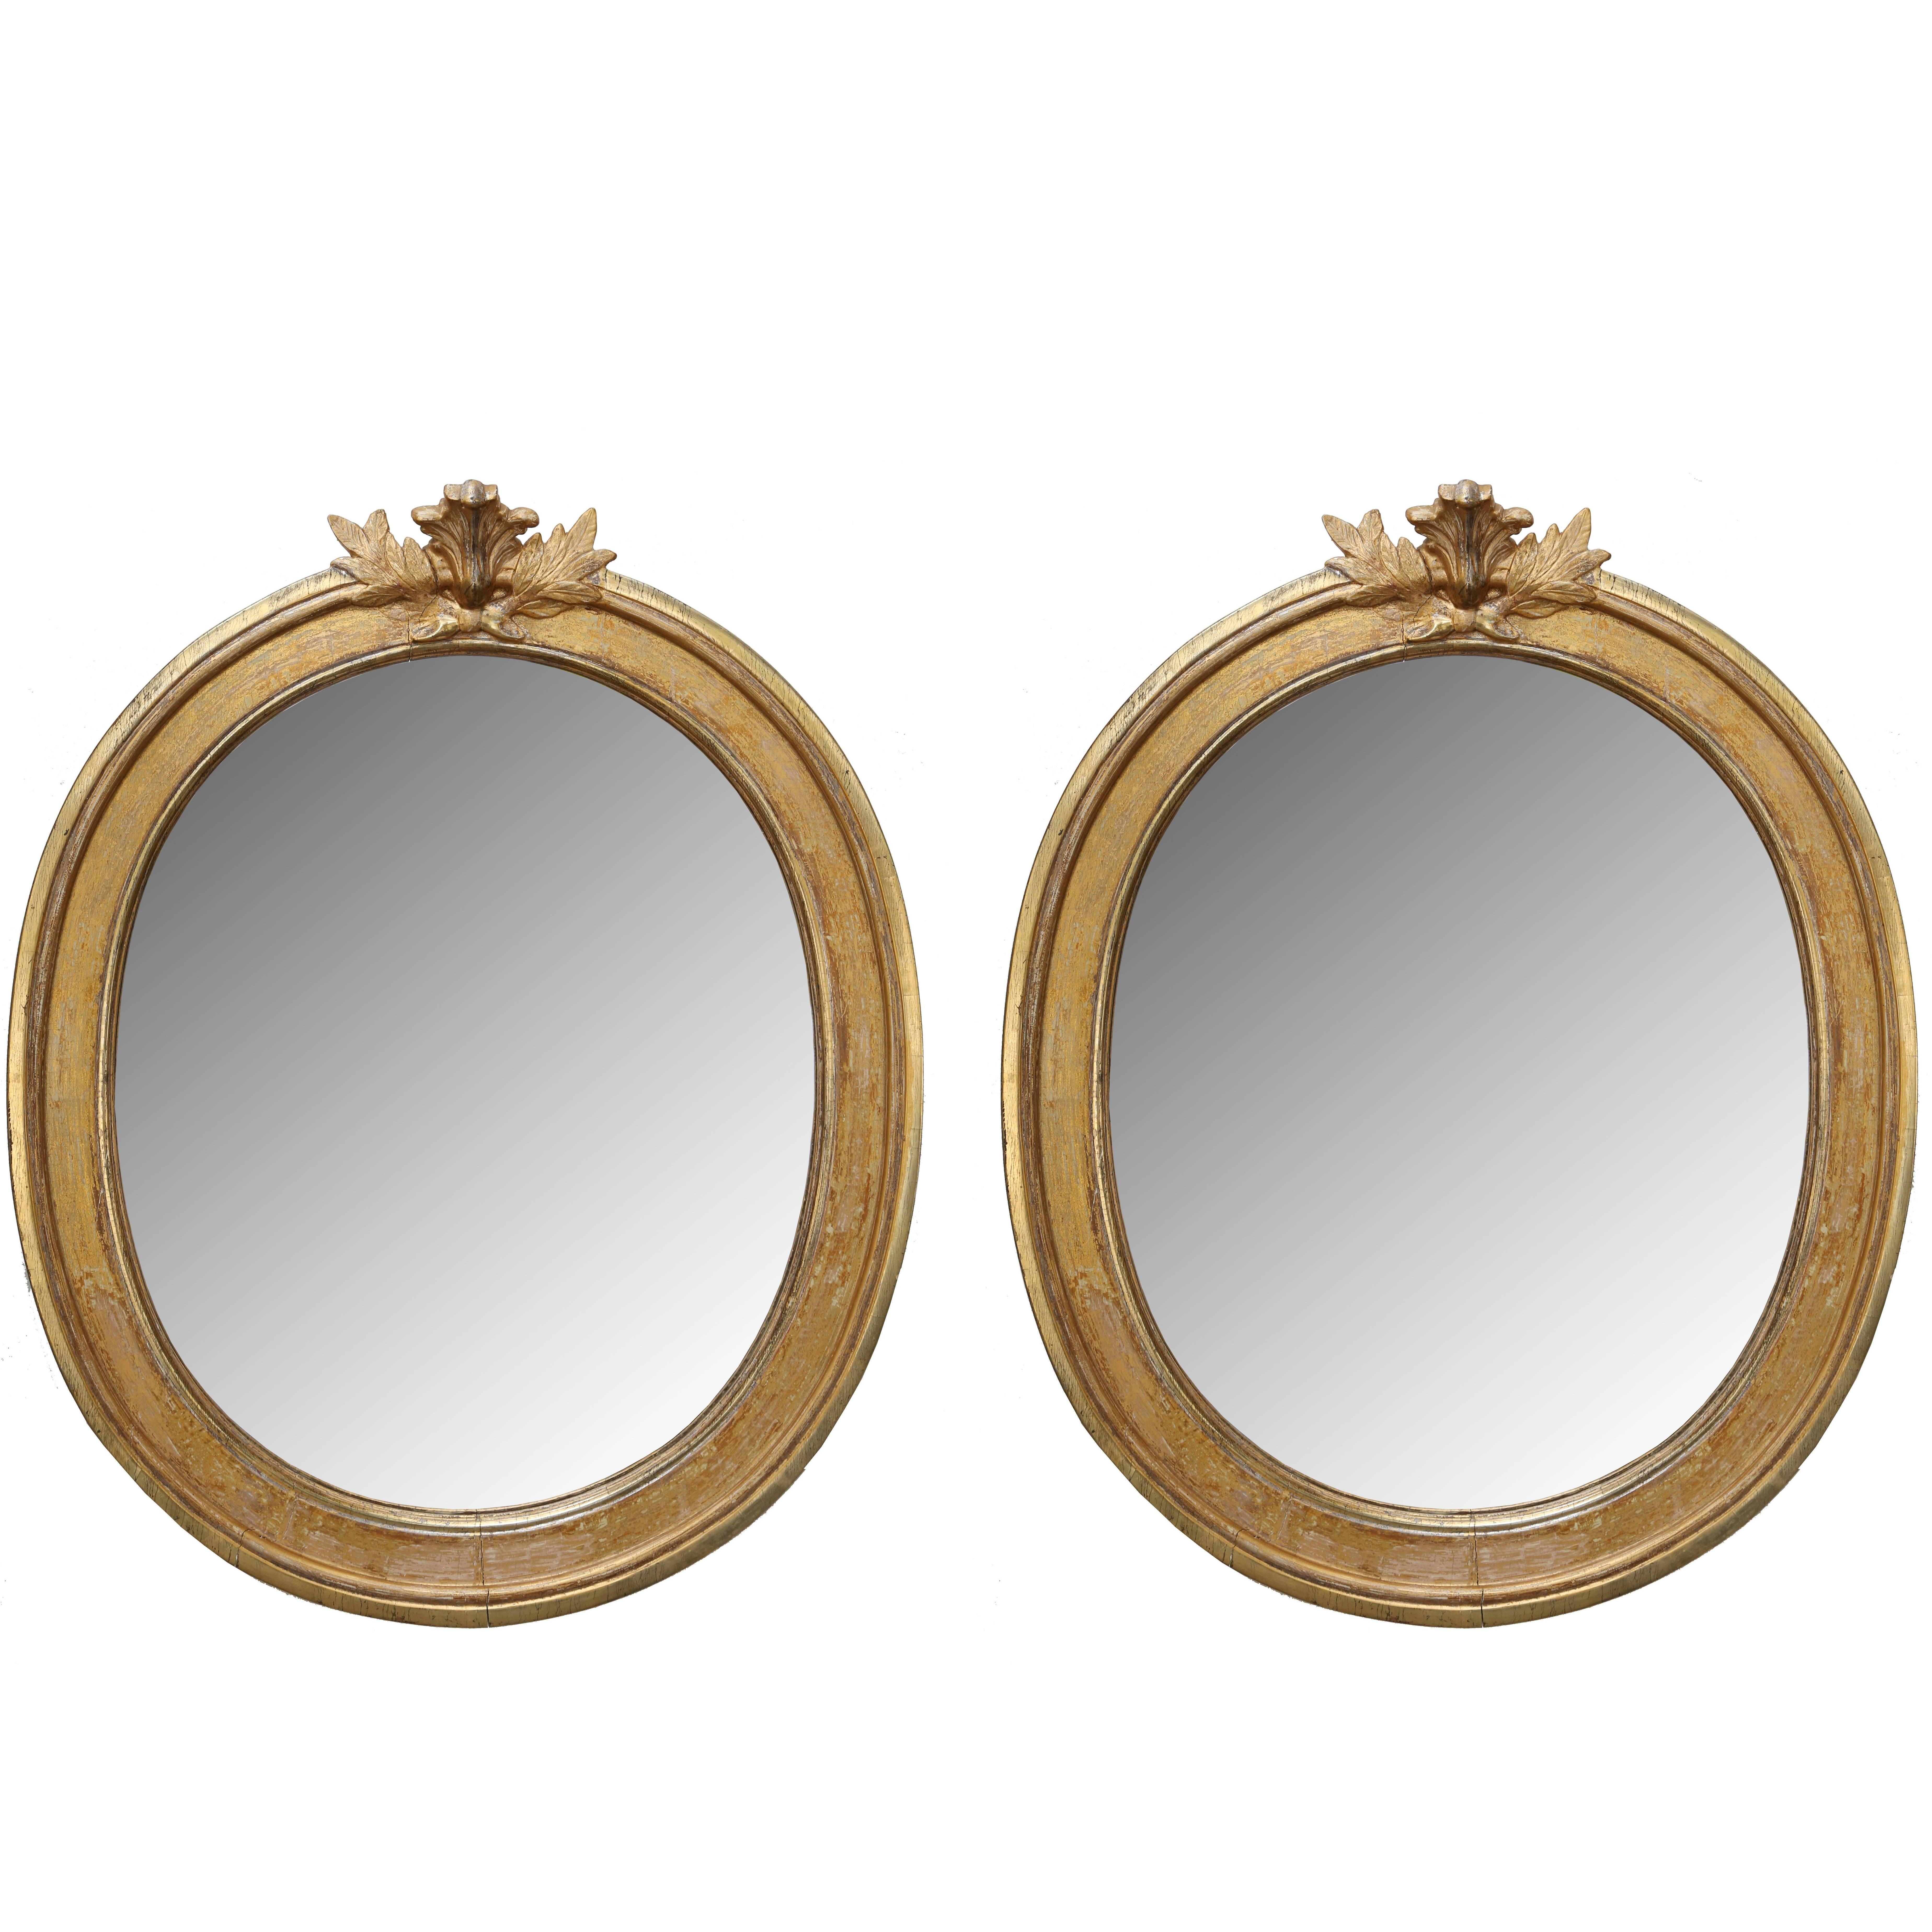 Pair of Antique Swedish Gustavian Oval Mirrors Early 19th Century